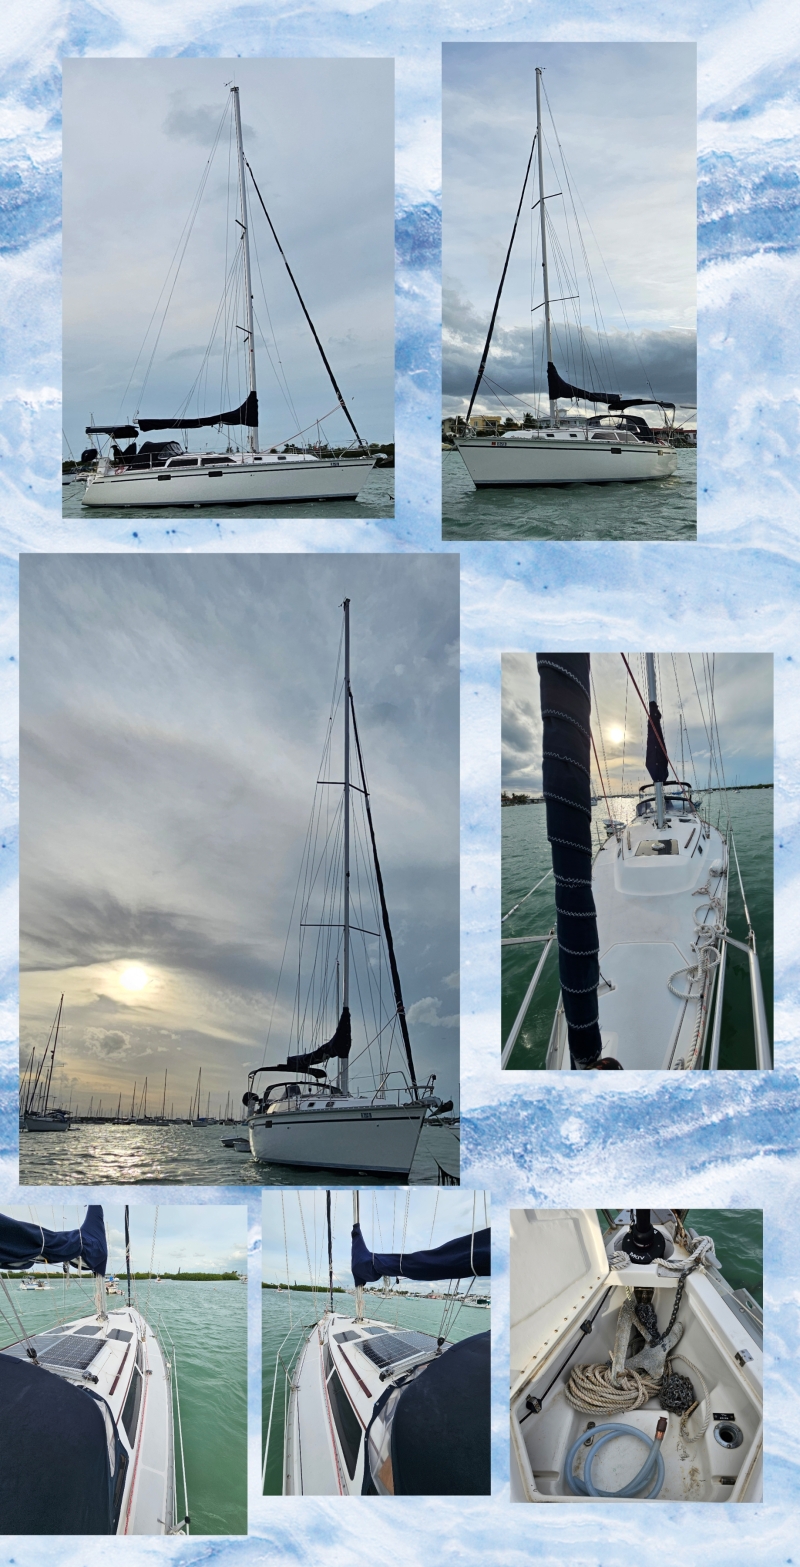 1992 Hunter 33.5 Sailboat for sale in Conch Key, FL - image 3 